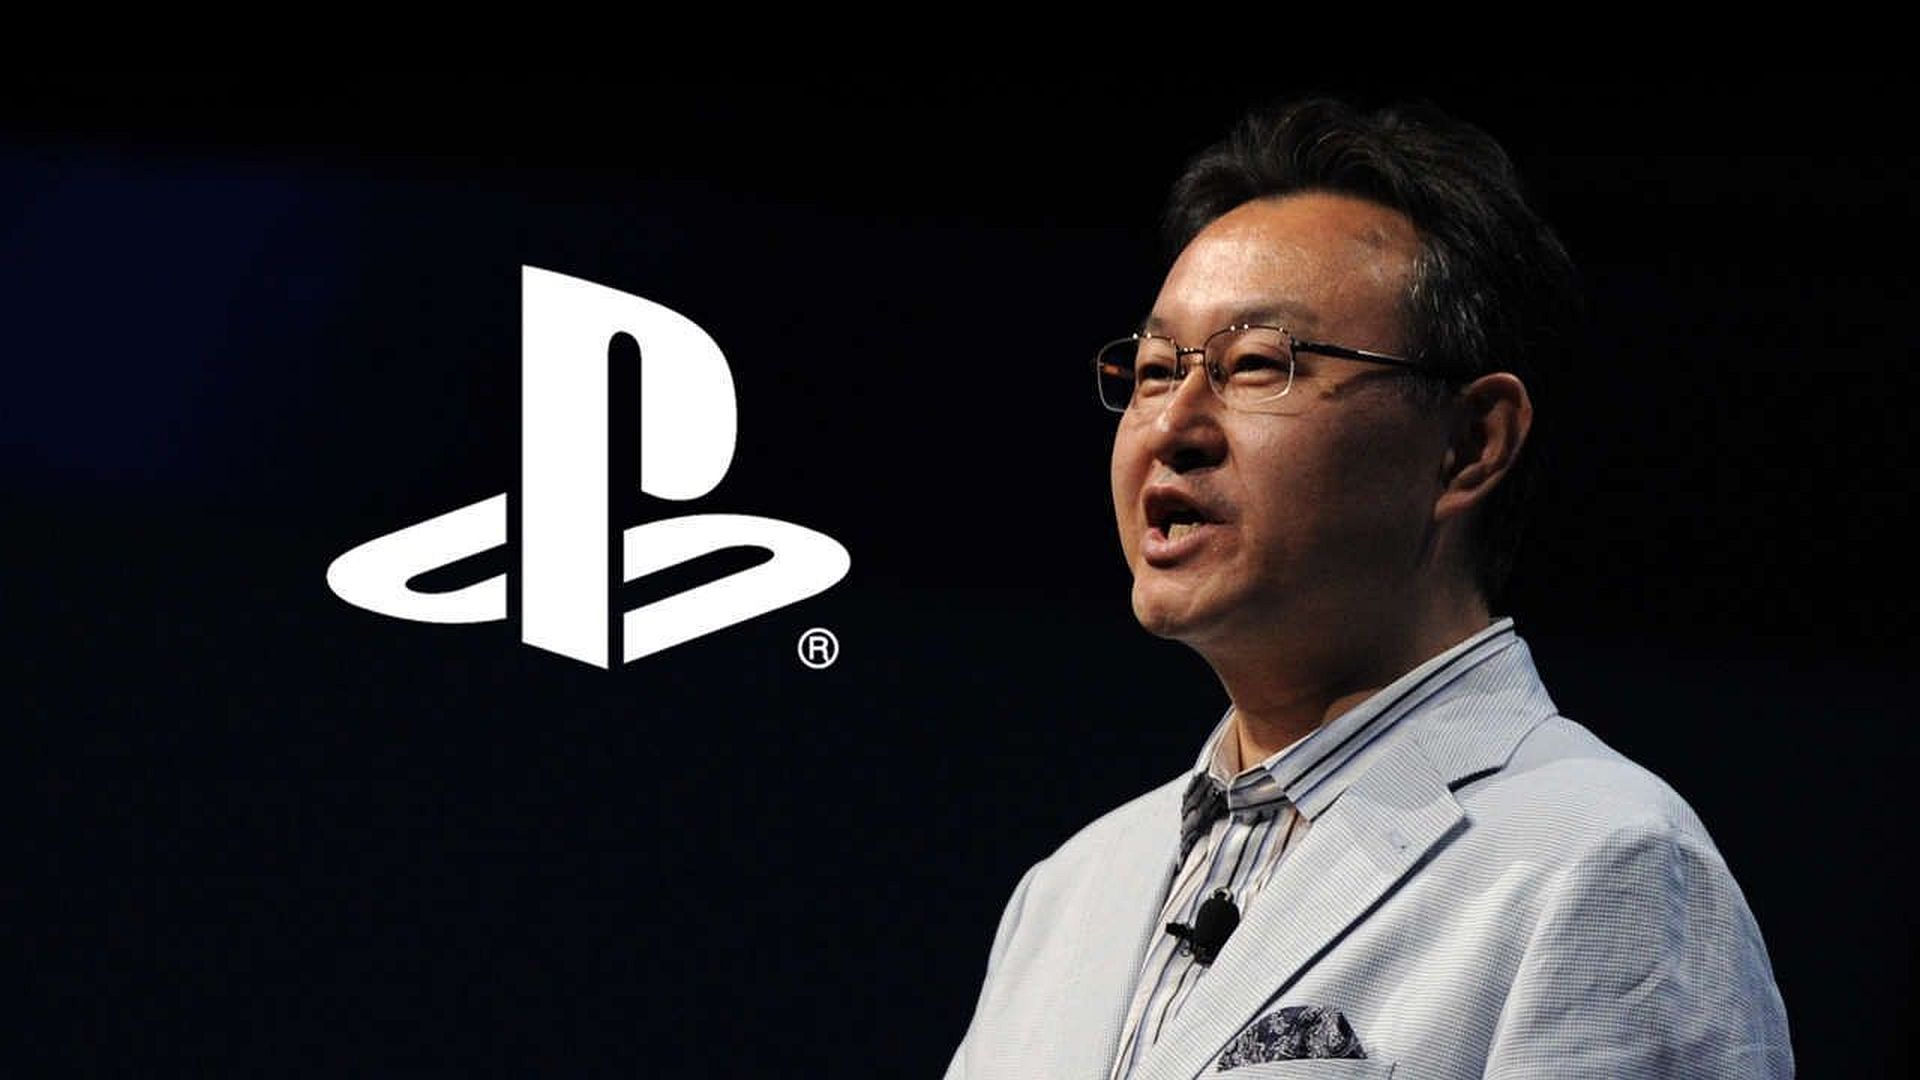 "It's a tool and you need to use it" - Shuhei Yoshida shares his thoughts on artificial intelligence